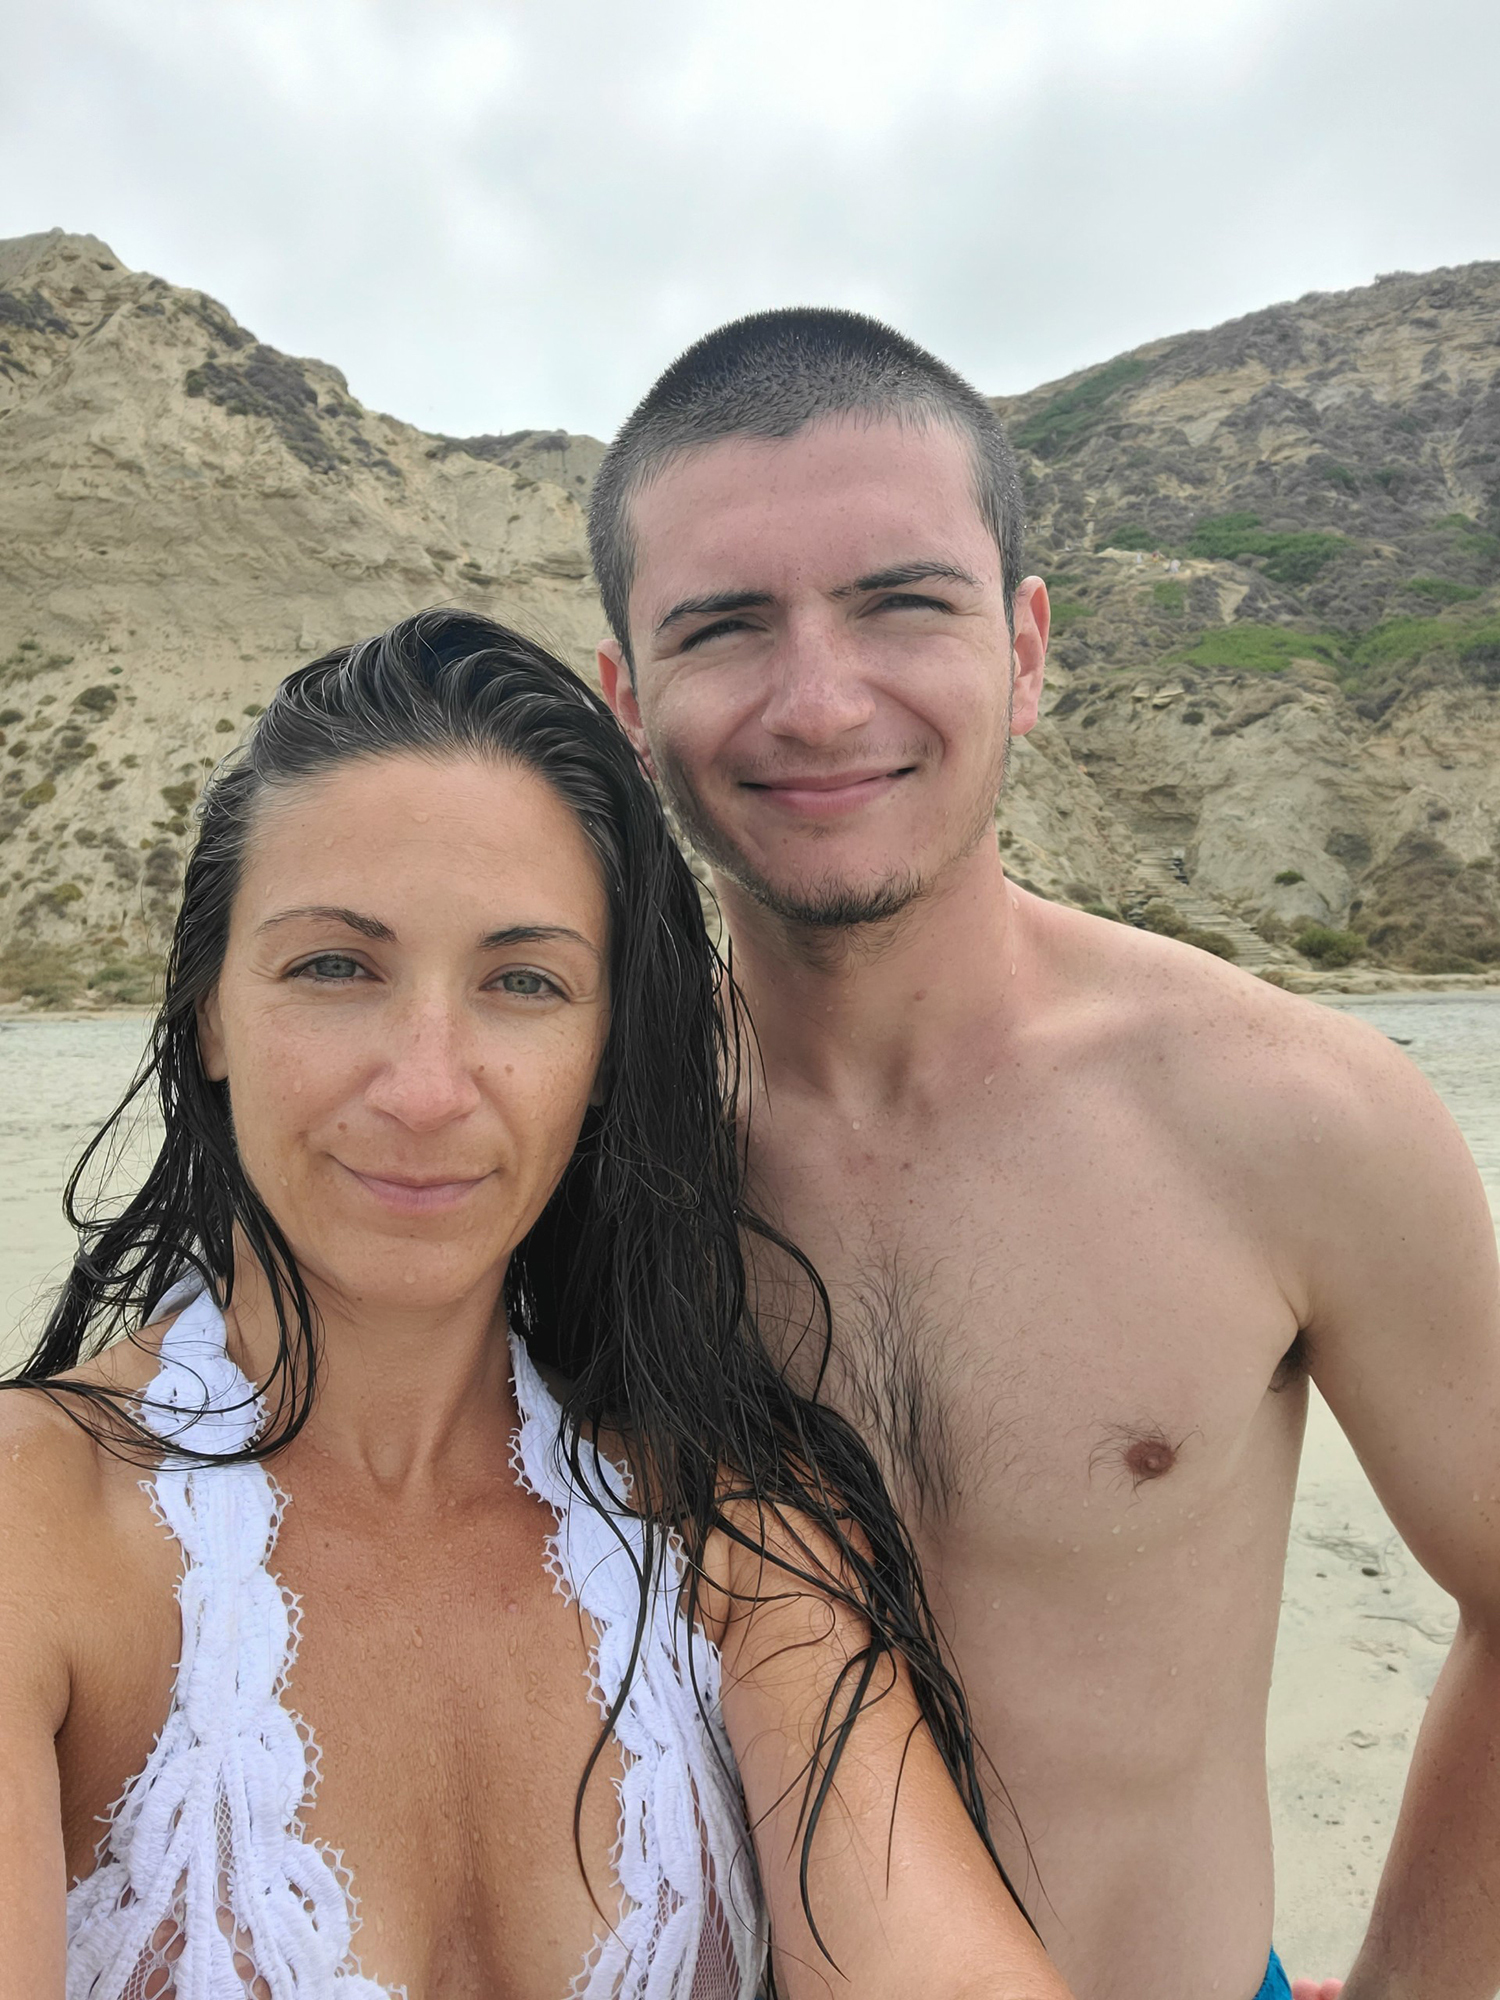 Raistlin Ruther, who died while kayak in Peconic Bay last weekend, pictures with his mother, Laura Gandara.